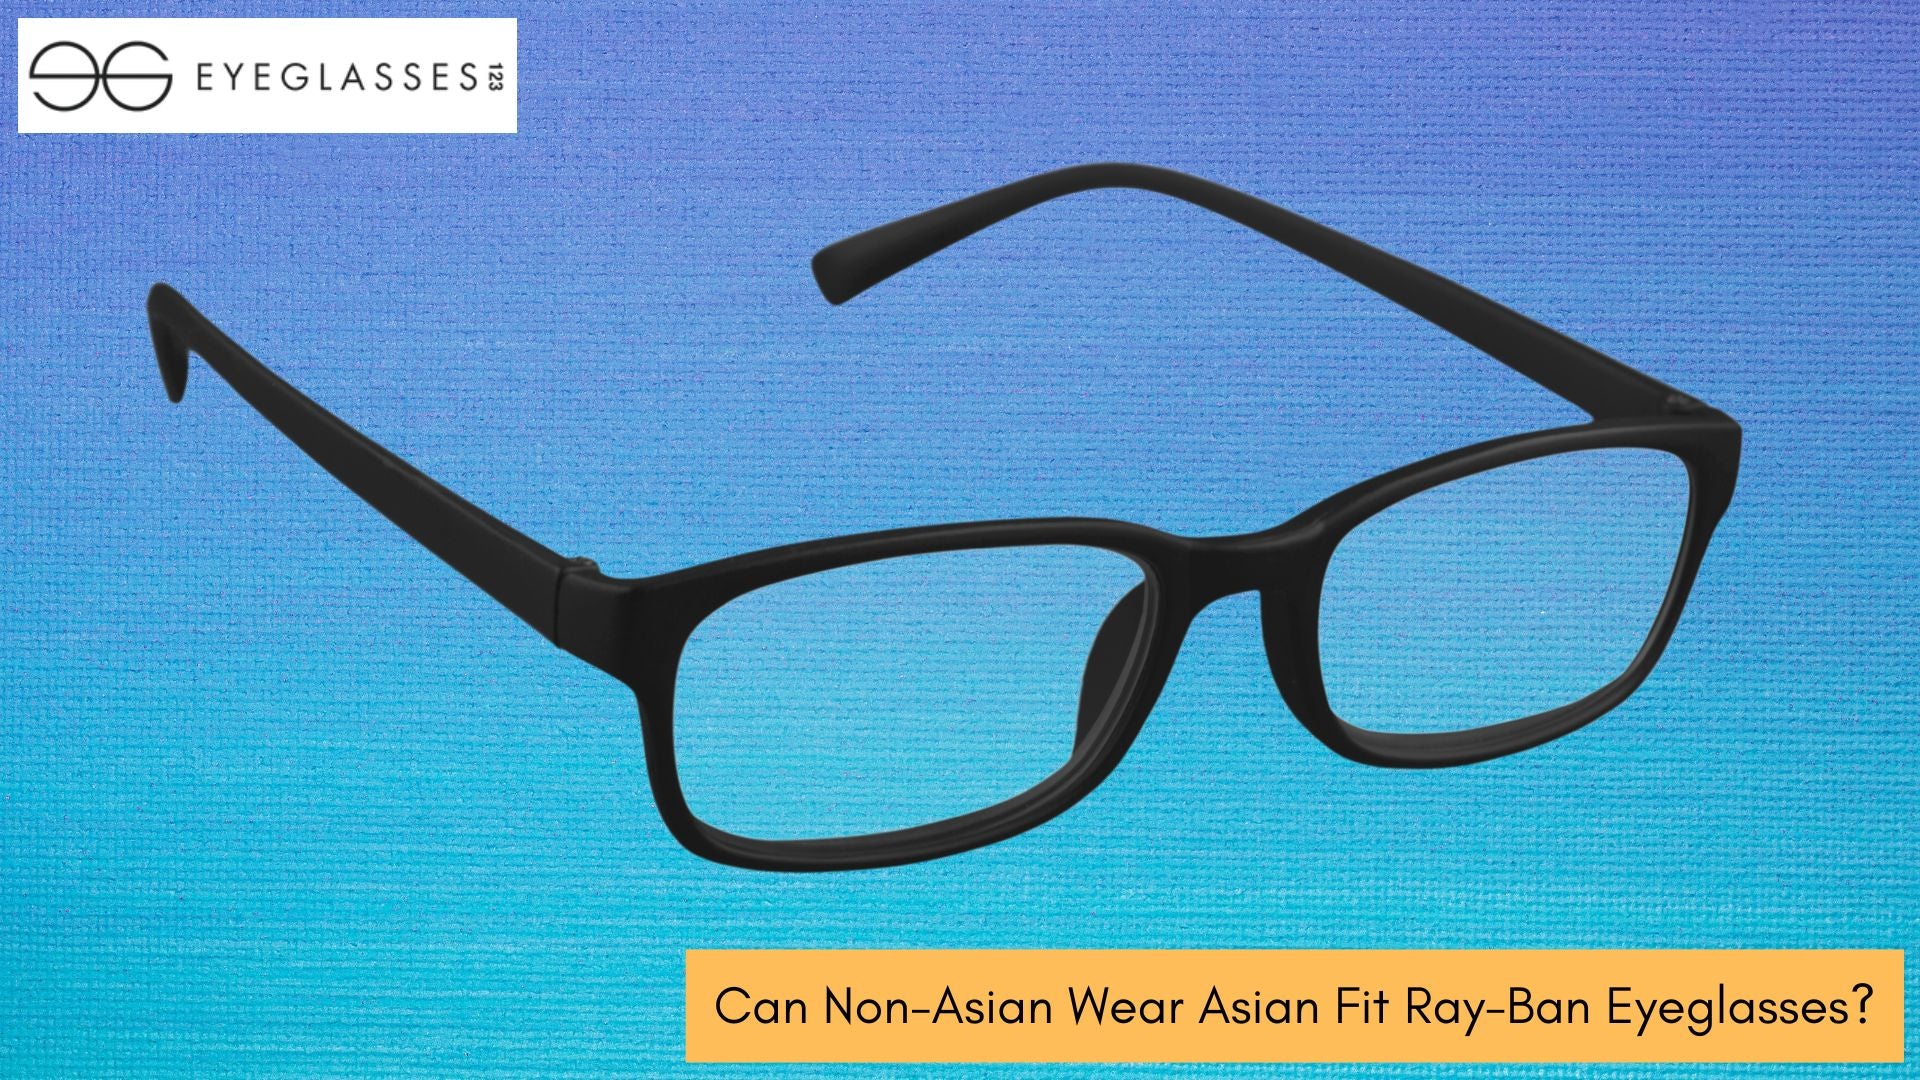 Can Non-Asian Wear Asian Fit Ray-Ban Eyeglasses?